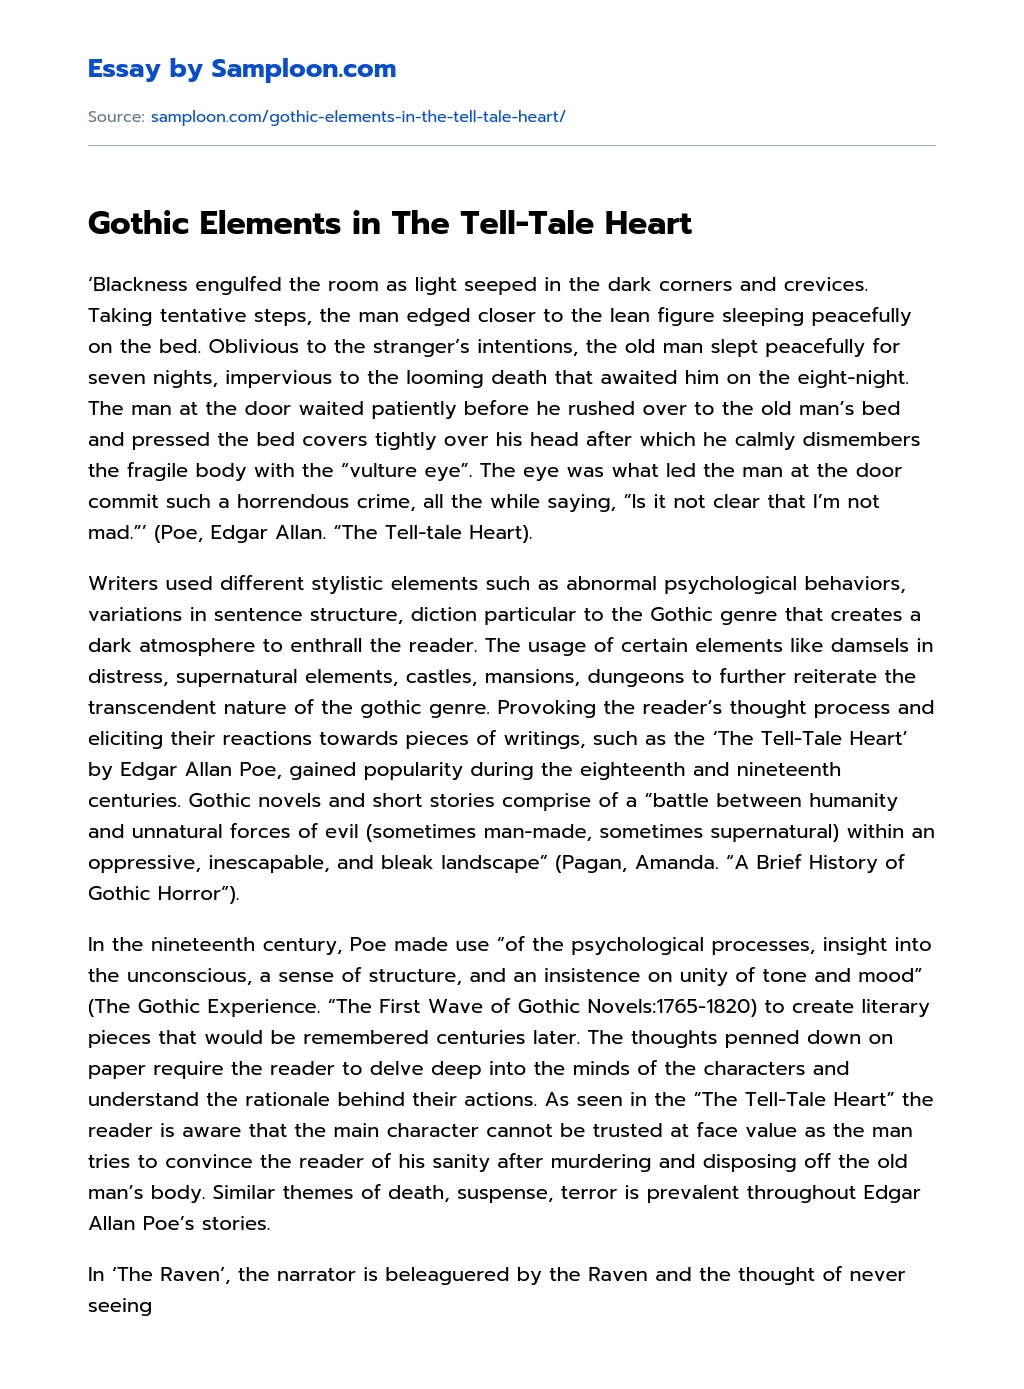 Gothic Elements in The Tell-Tale Heart essay